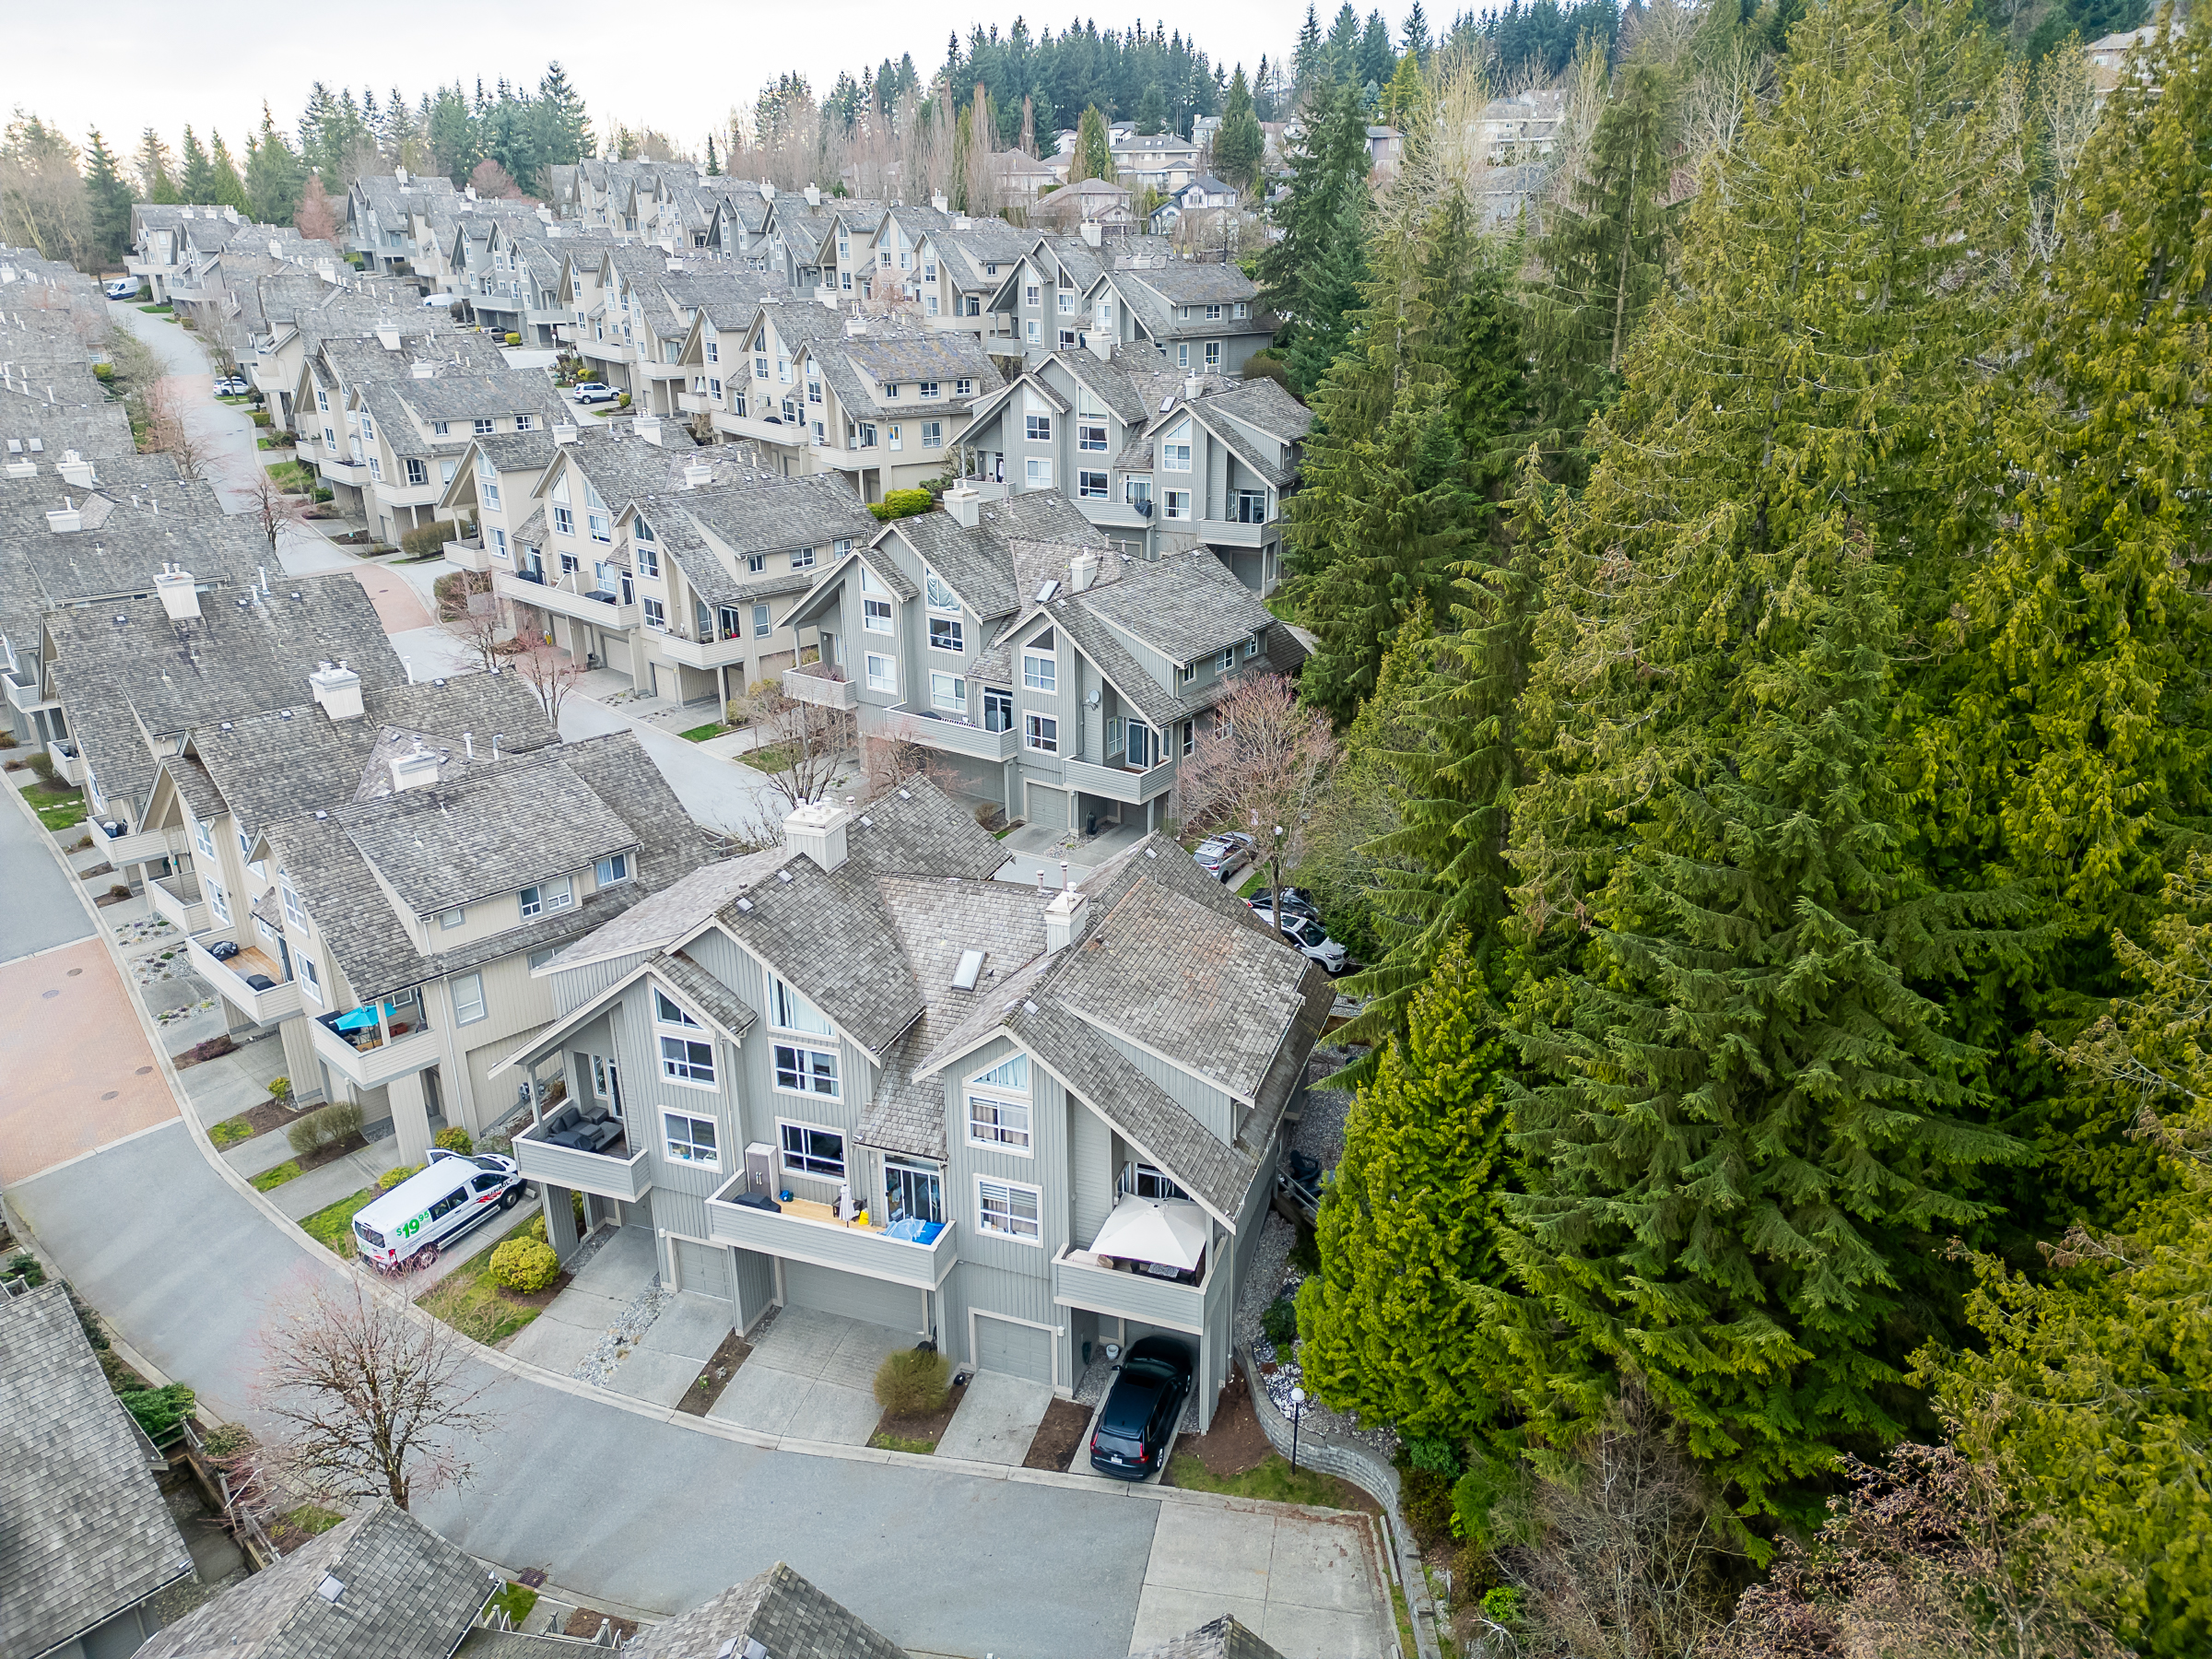 Westwood Plateau Townhome for Sale 1465 Parkway Blvd Coquitlam Top Realtor Krista Lapp